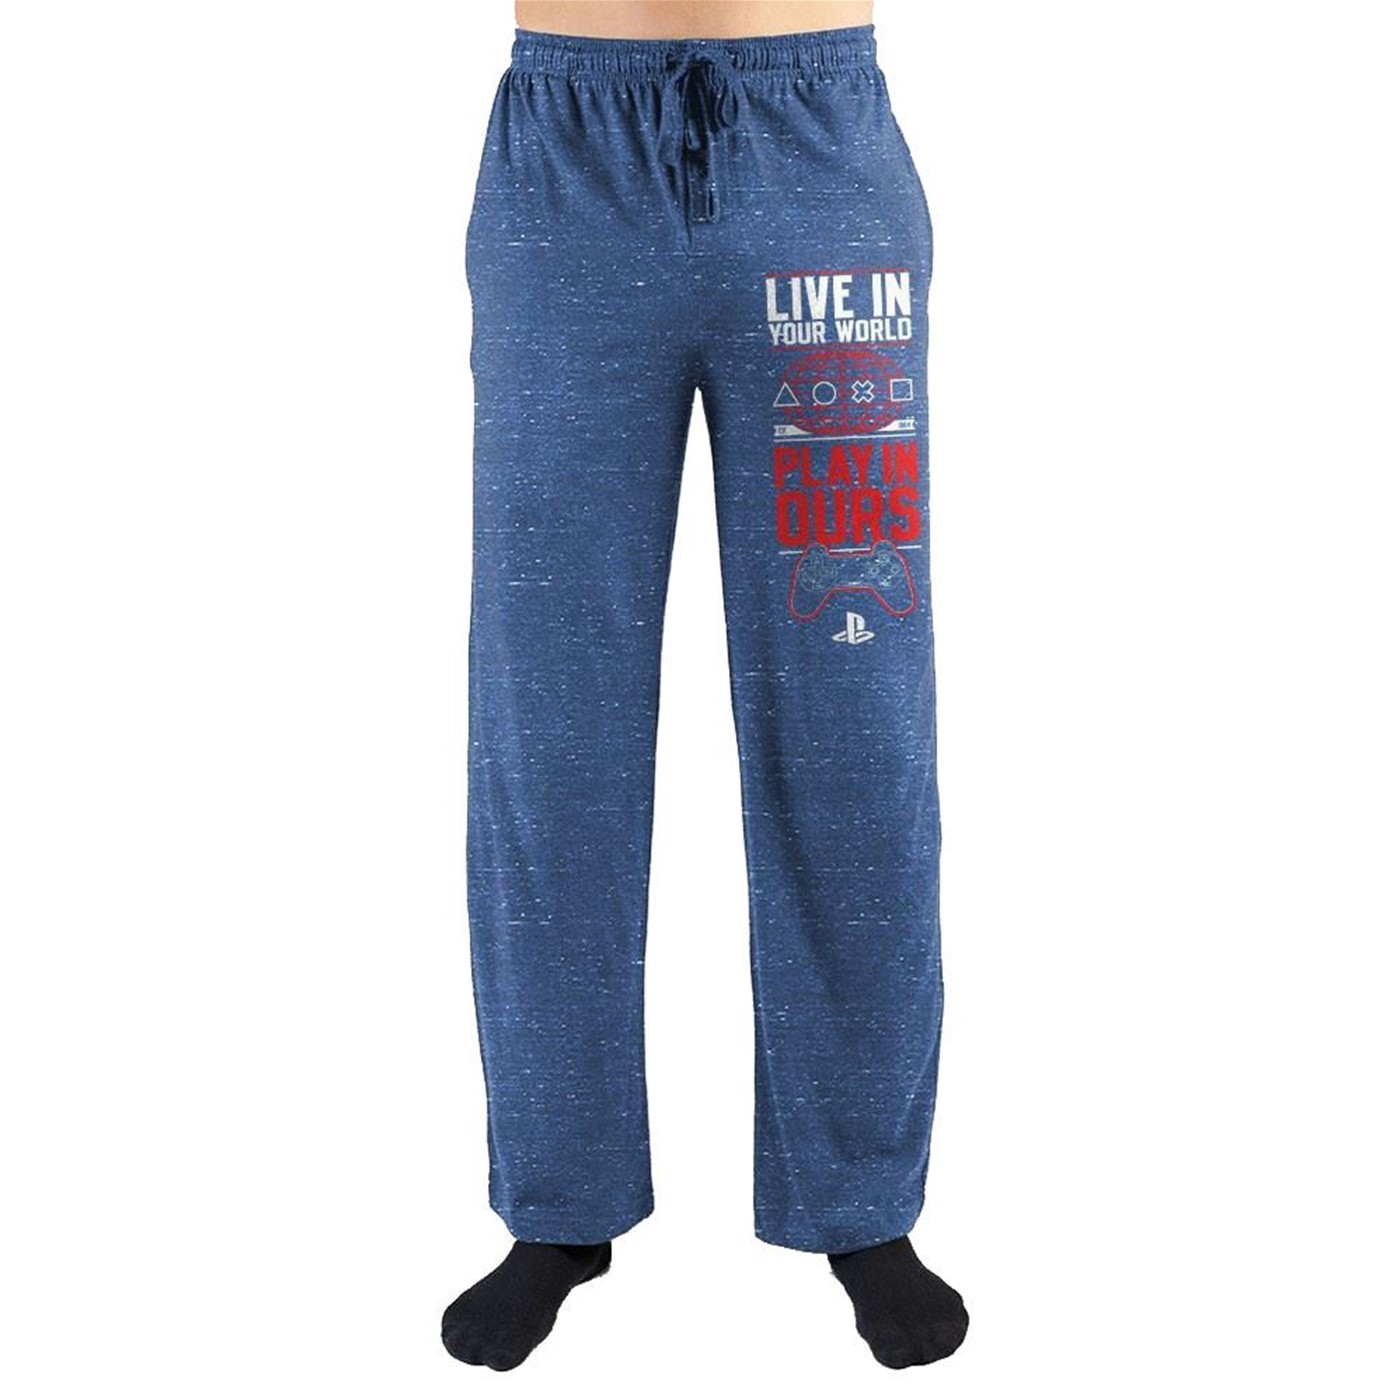 Sony Playstation "Live in your World" Pants